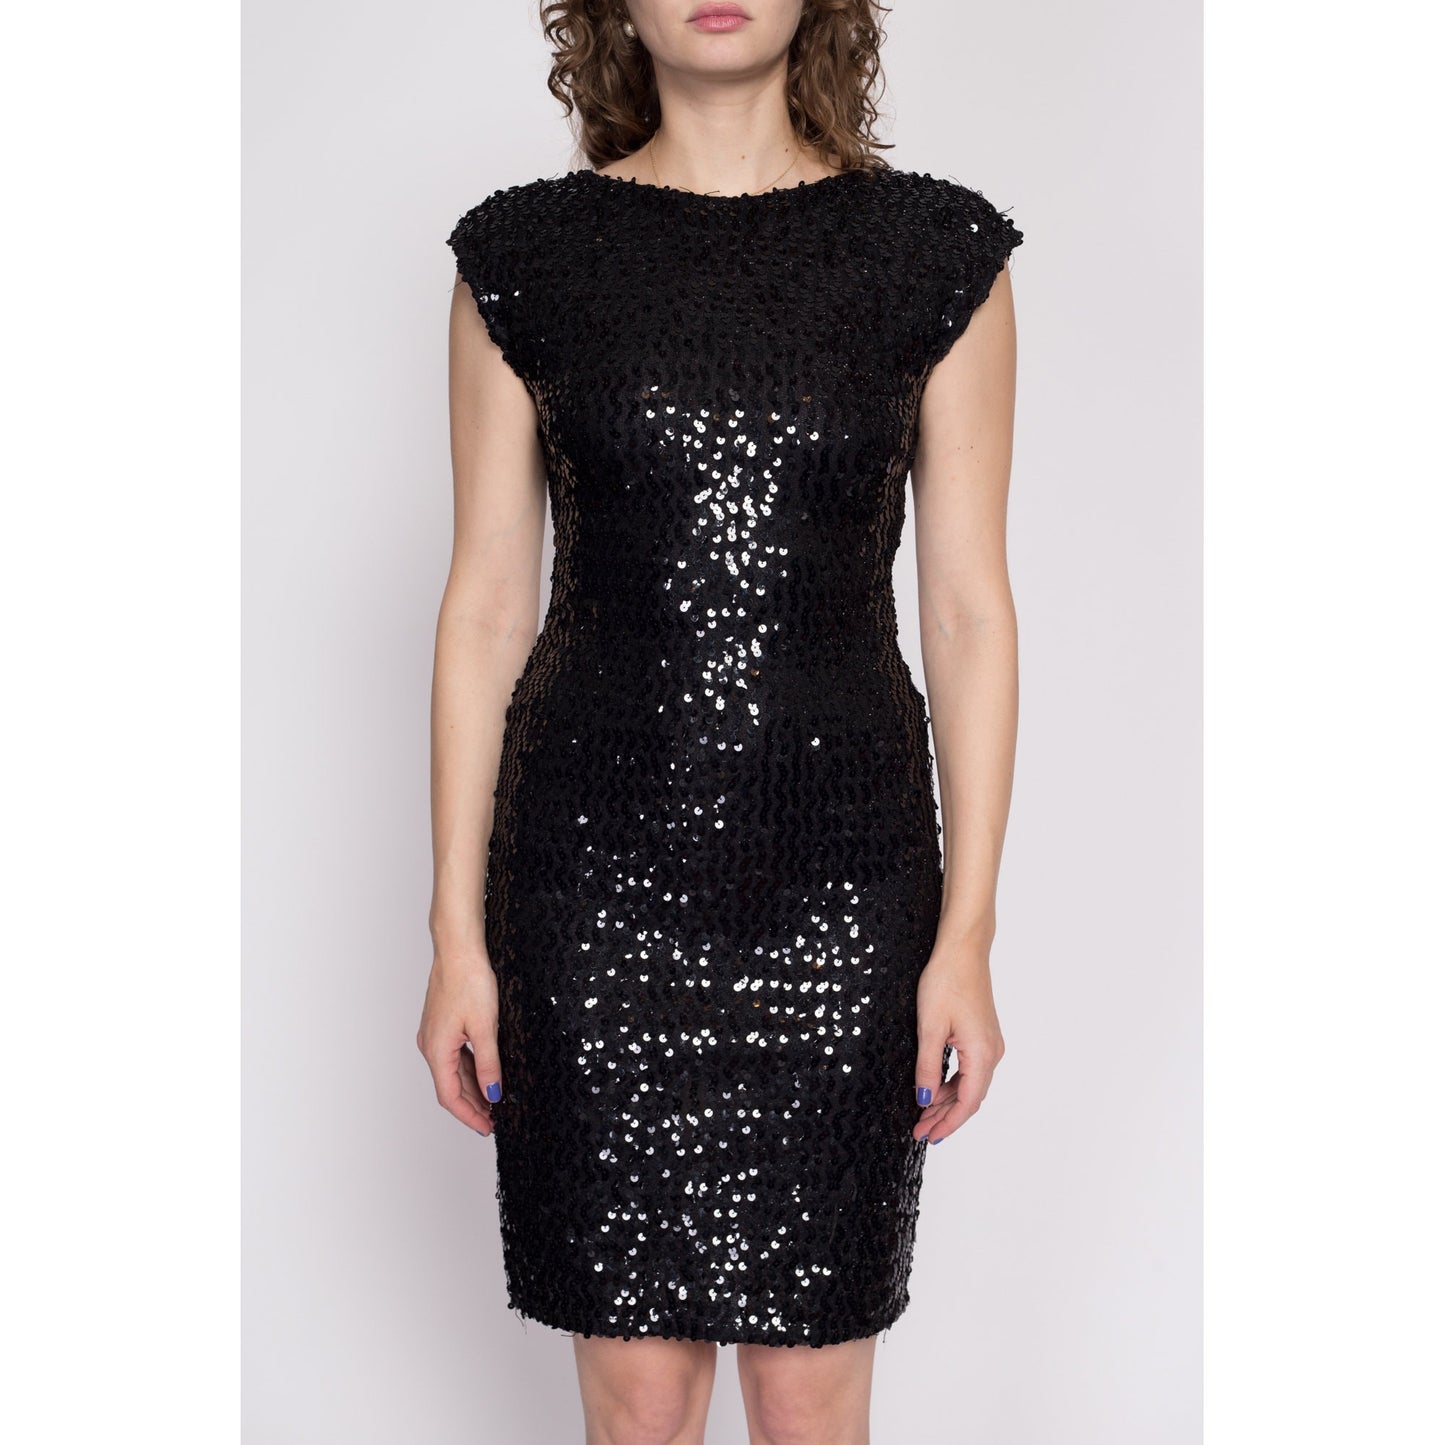 M| 80s 90s Low Back Black Sequin Dress - Medium | Vintage Bodycon Fitted Cocktail Party Mini Dress